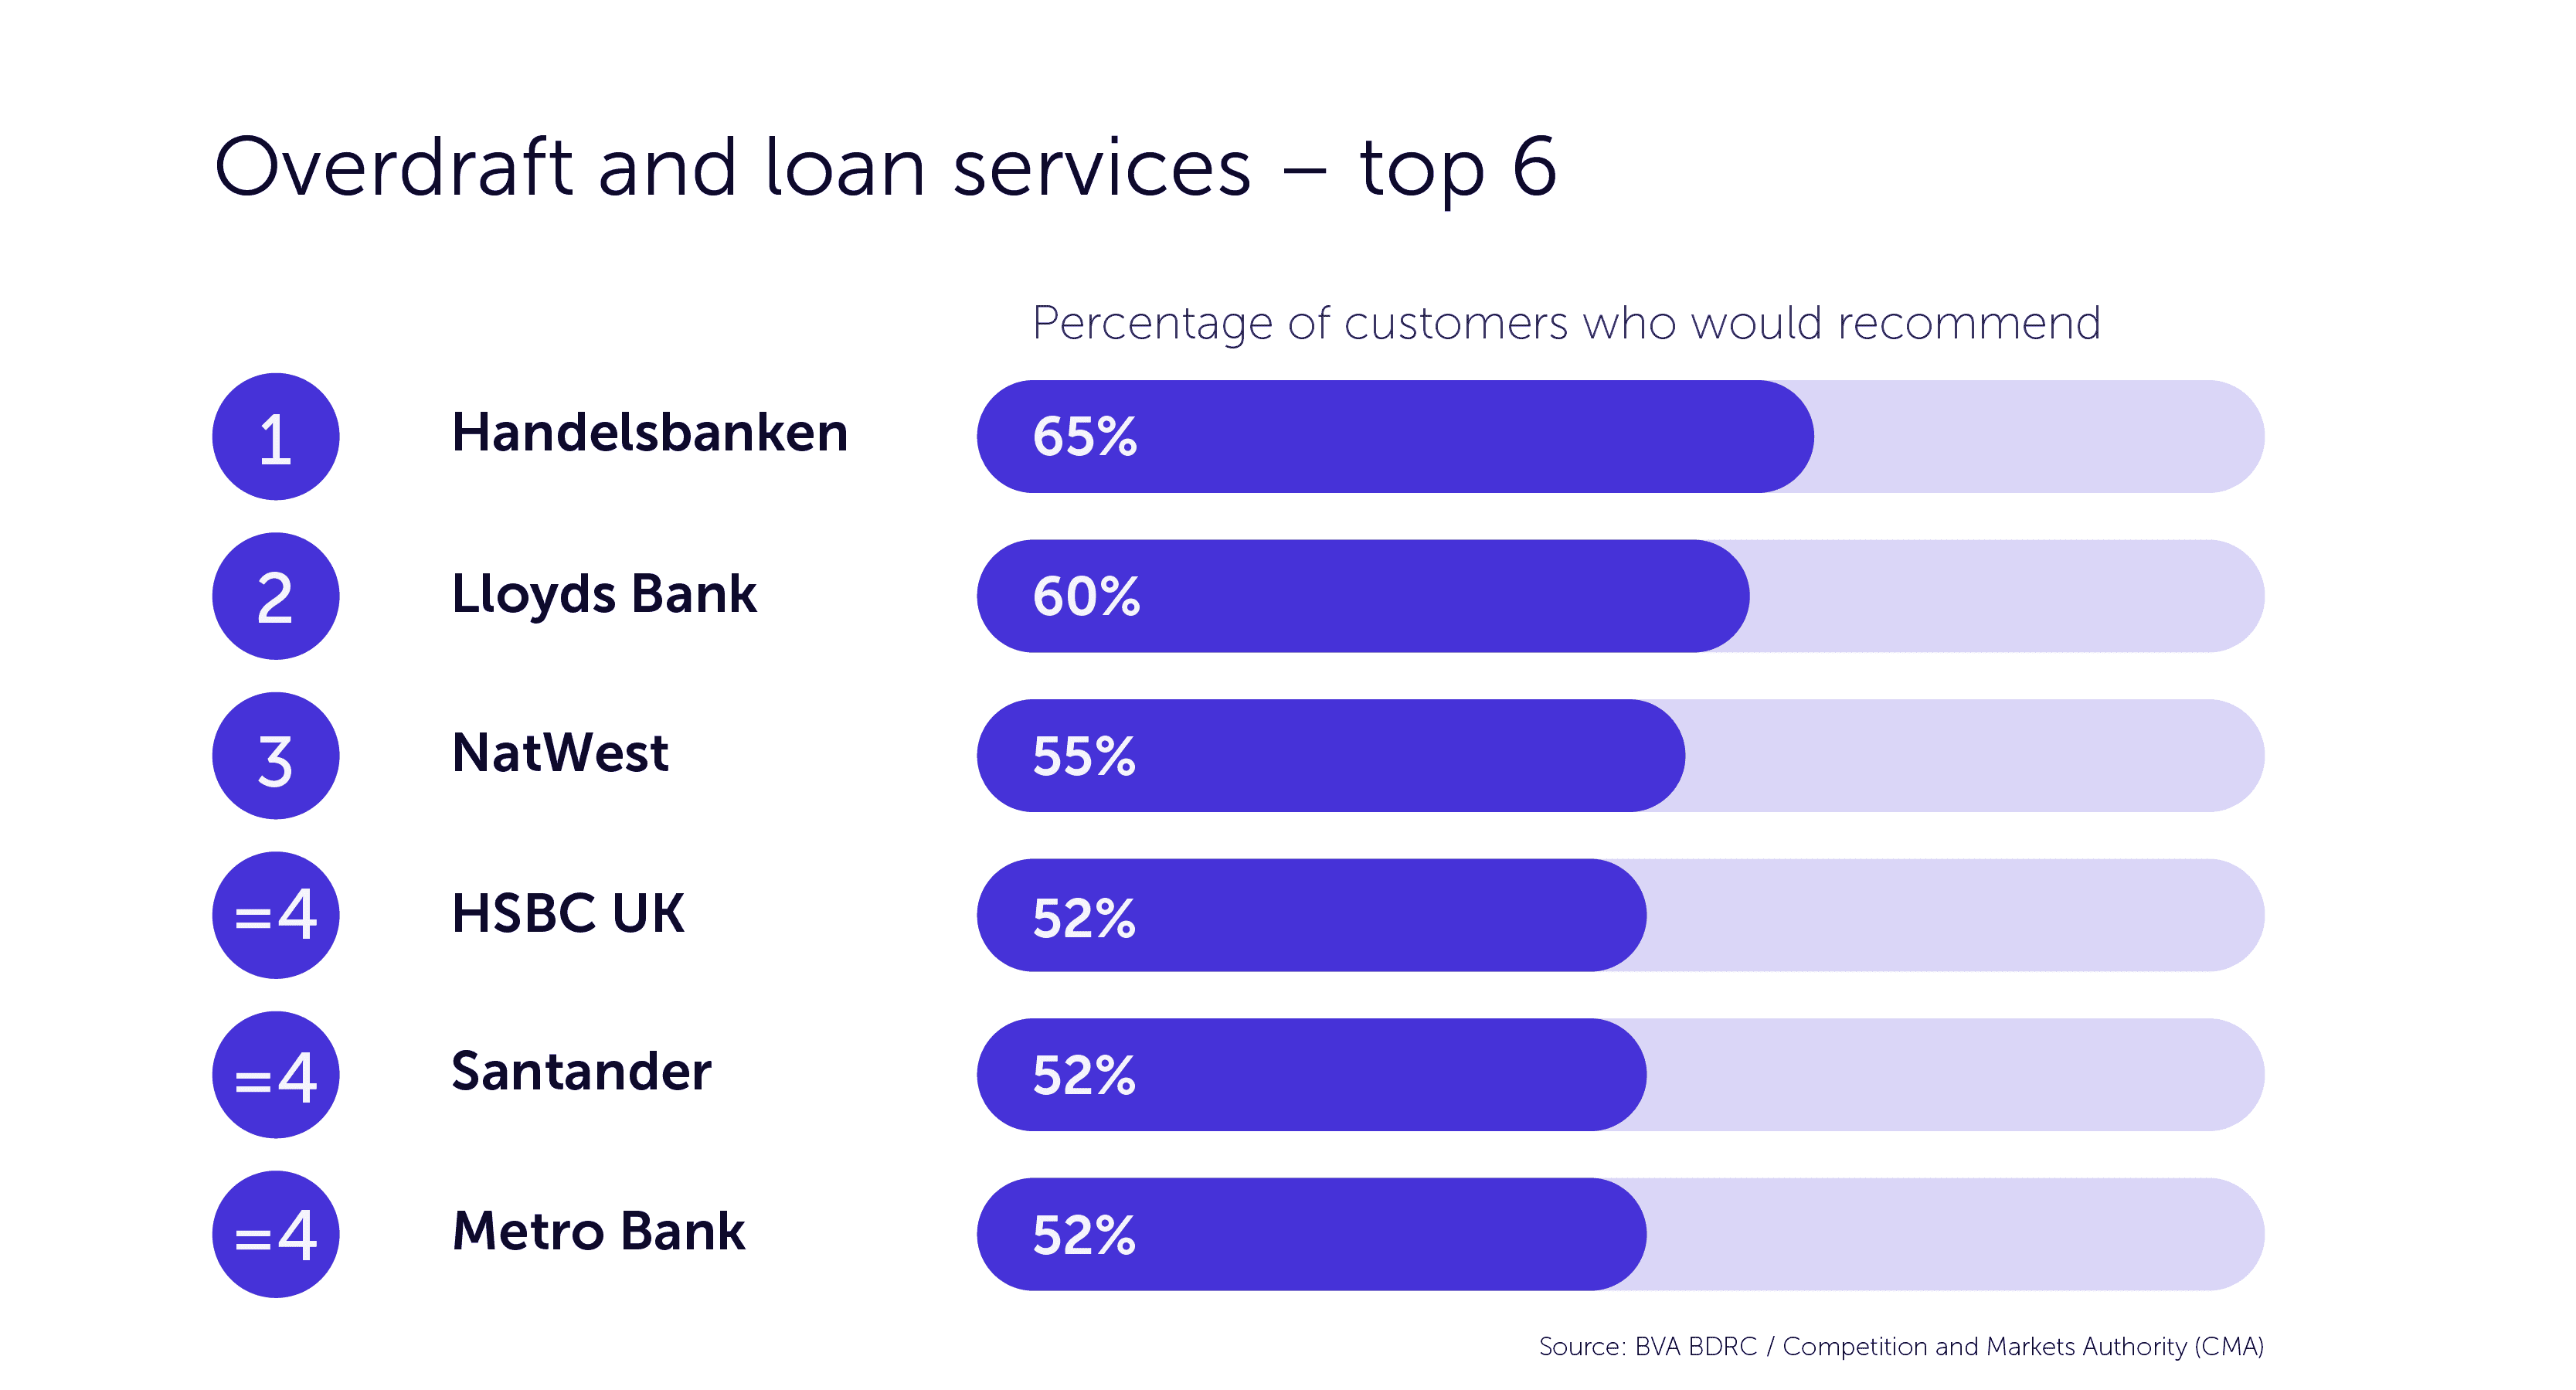 Top 5 business banks for overdraft and loan services